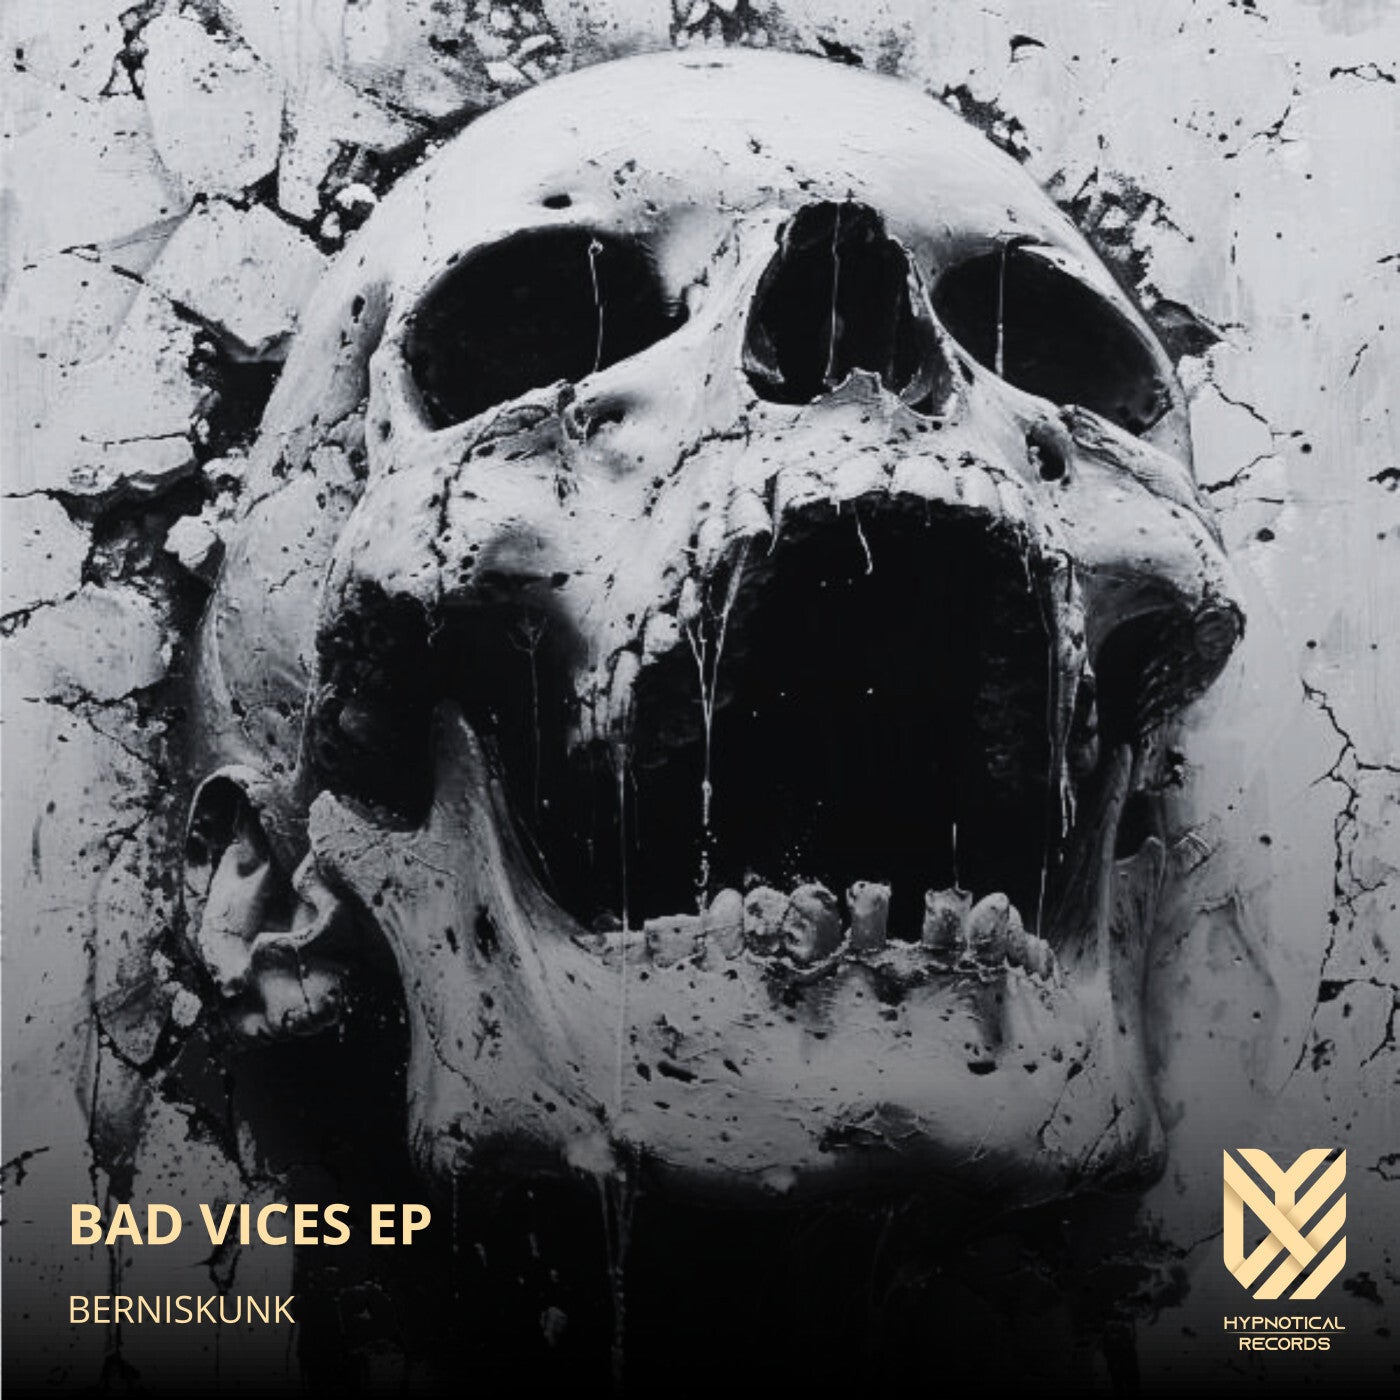 Bad Vices EP